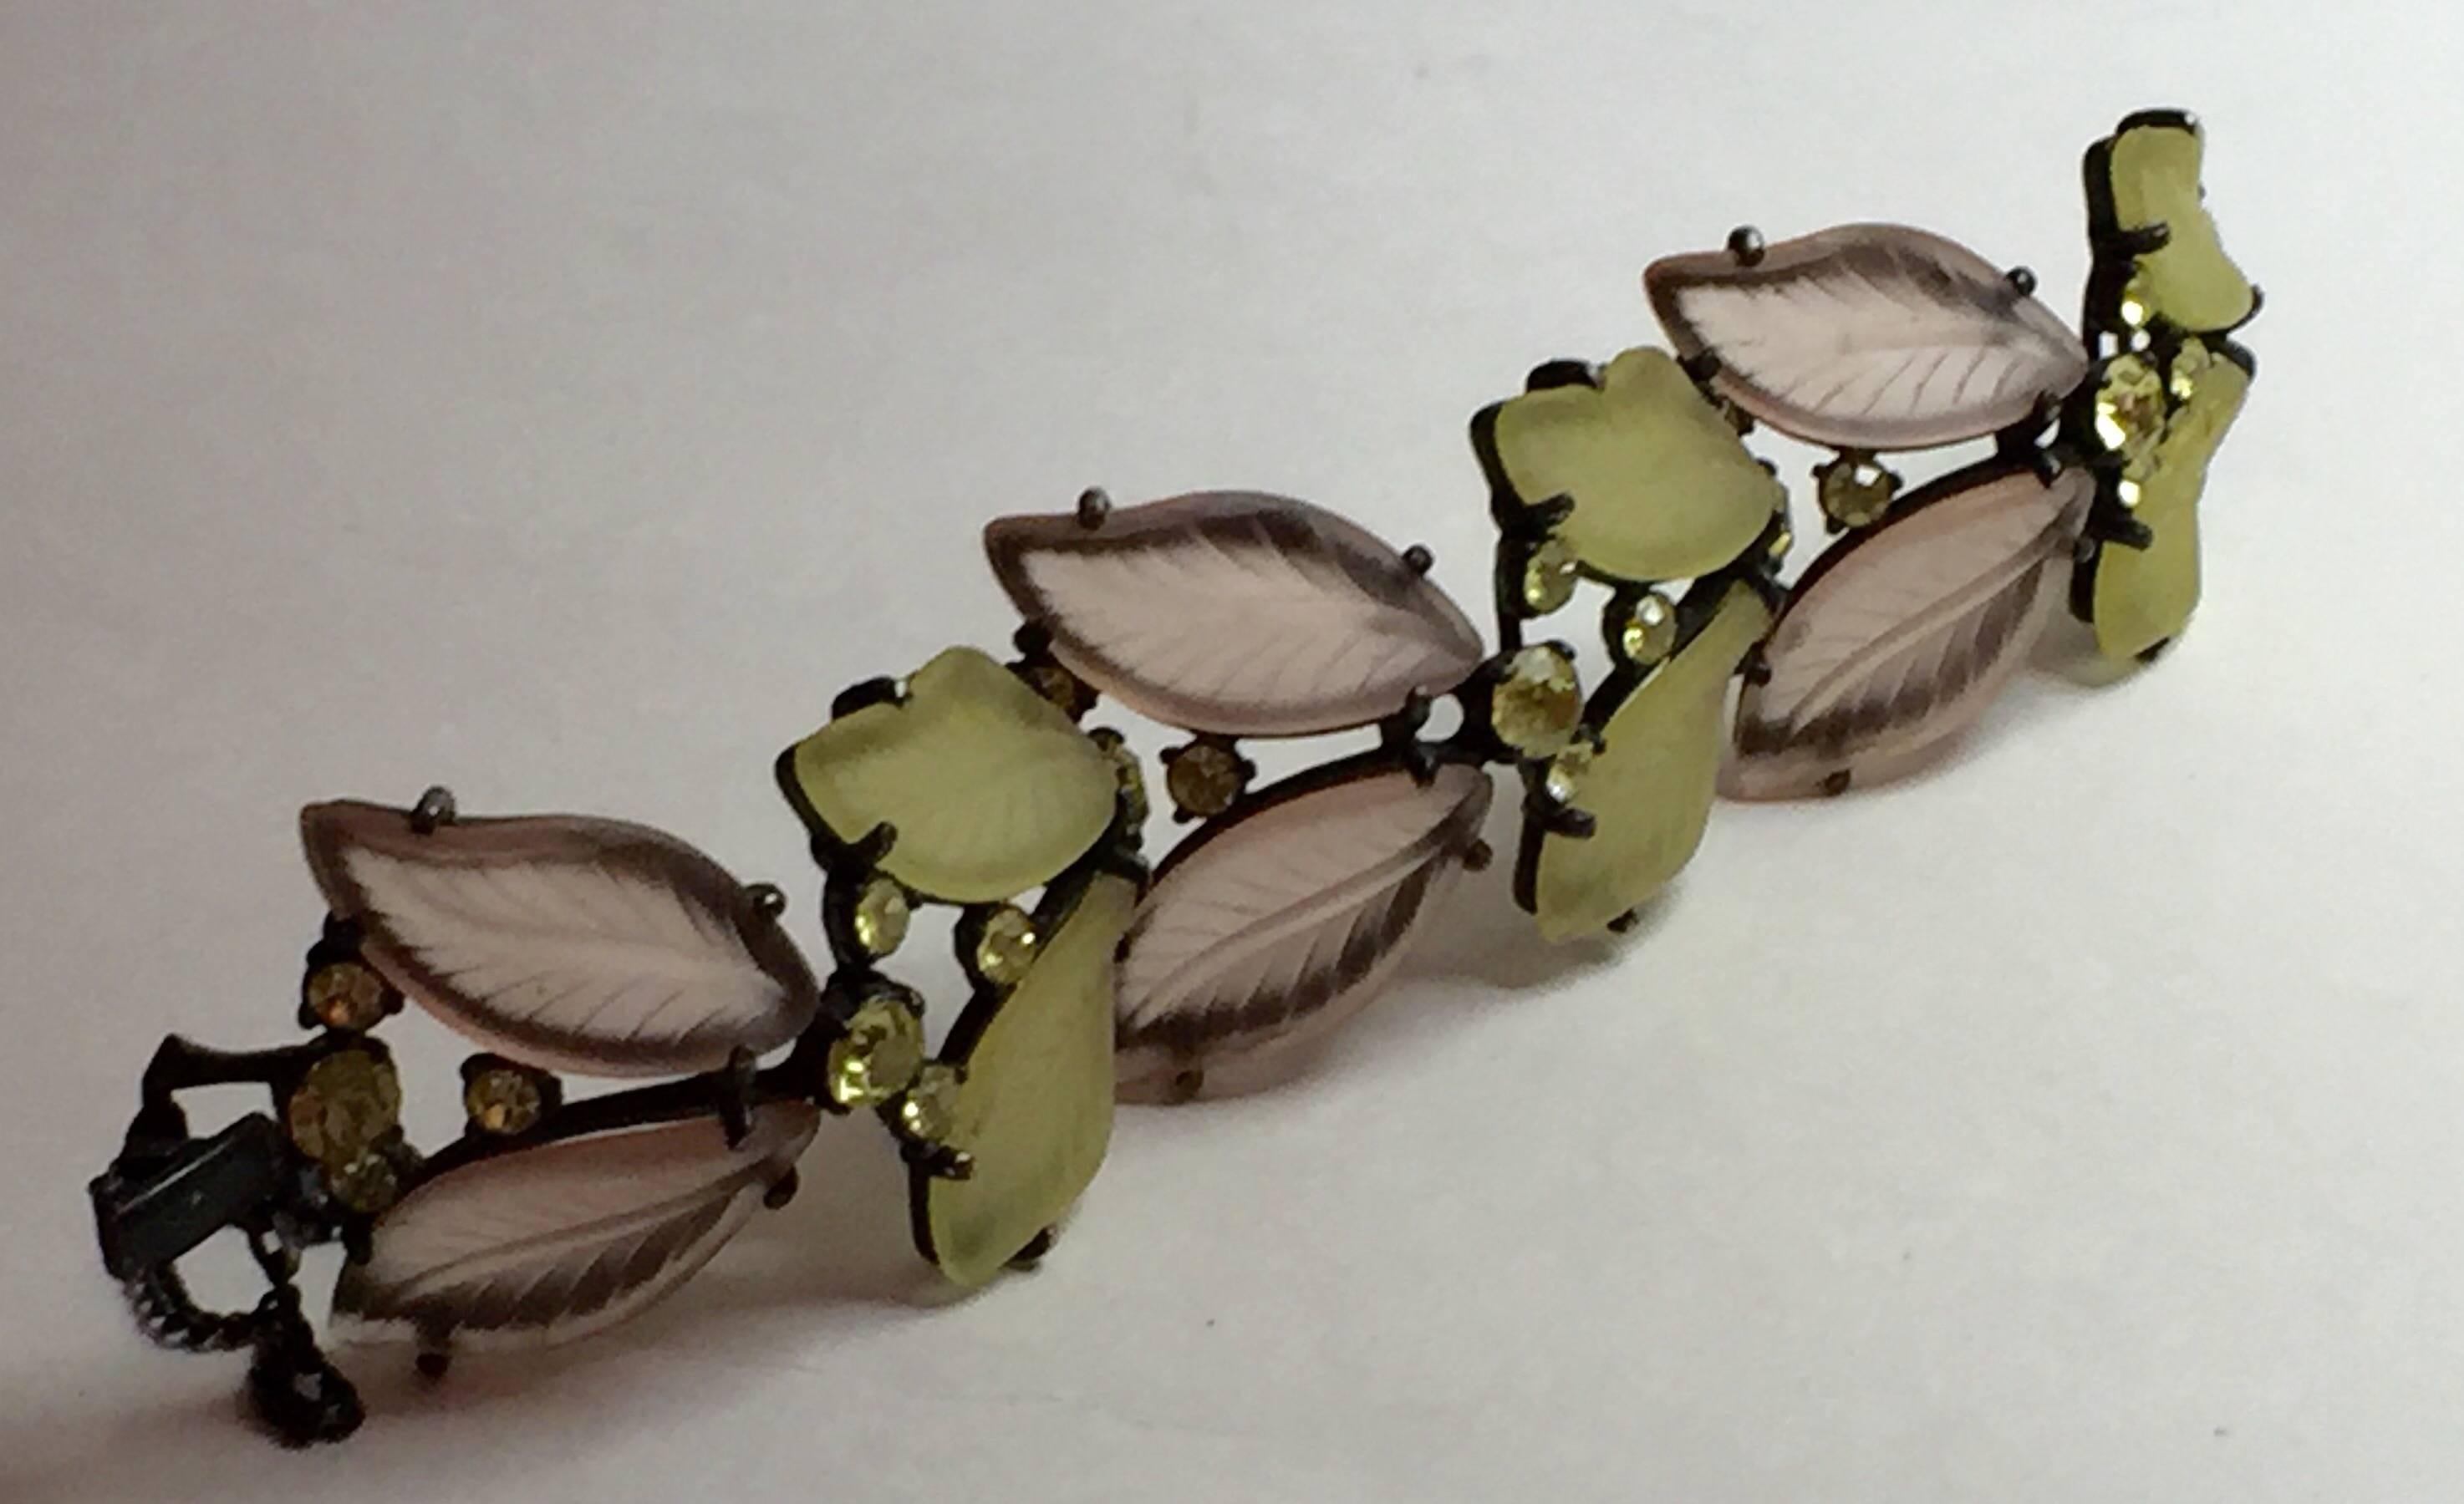 A softly pastel color palette of palest sepia pink and light green set in a darkened metal 'japanned' setting and set off with olivine circular rhinestones, make this Schiaparelli bracelet an unusual design. Reseembling American manufacturer LISNER